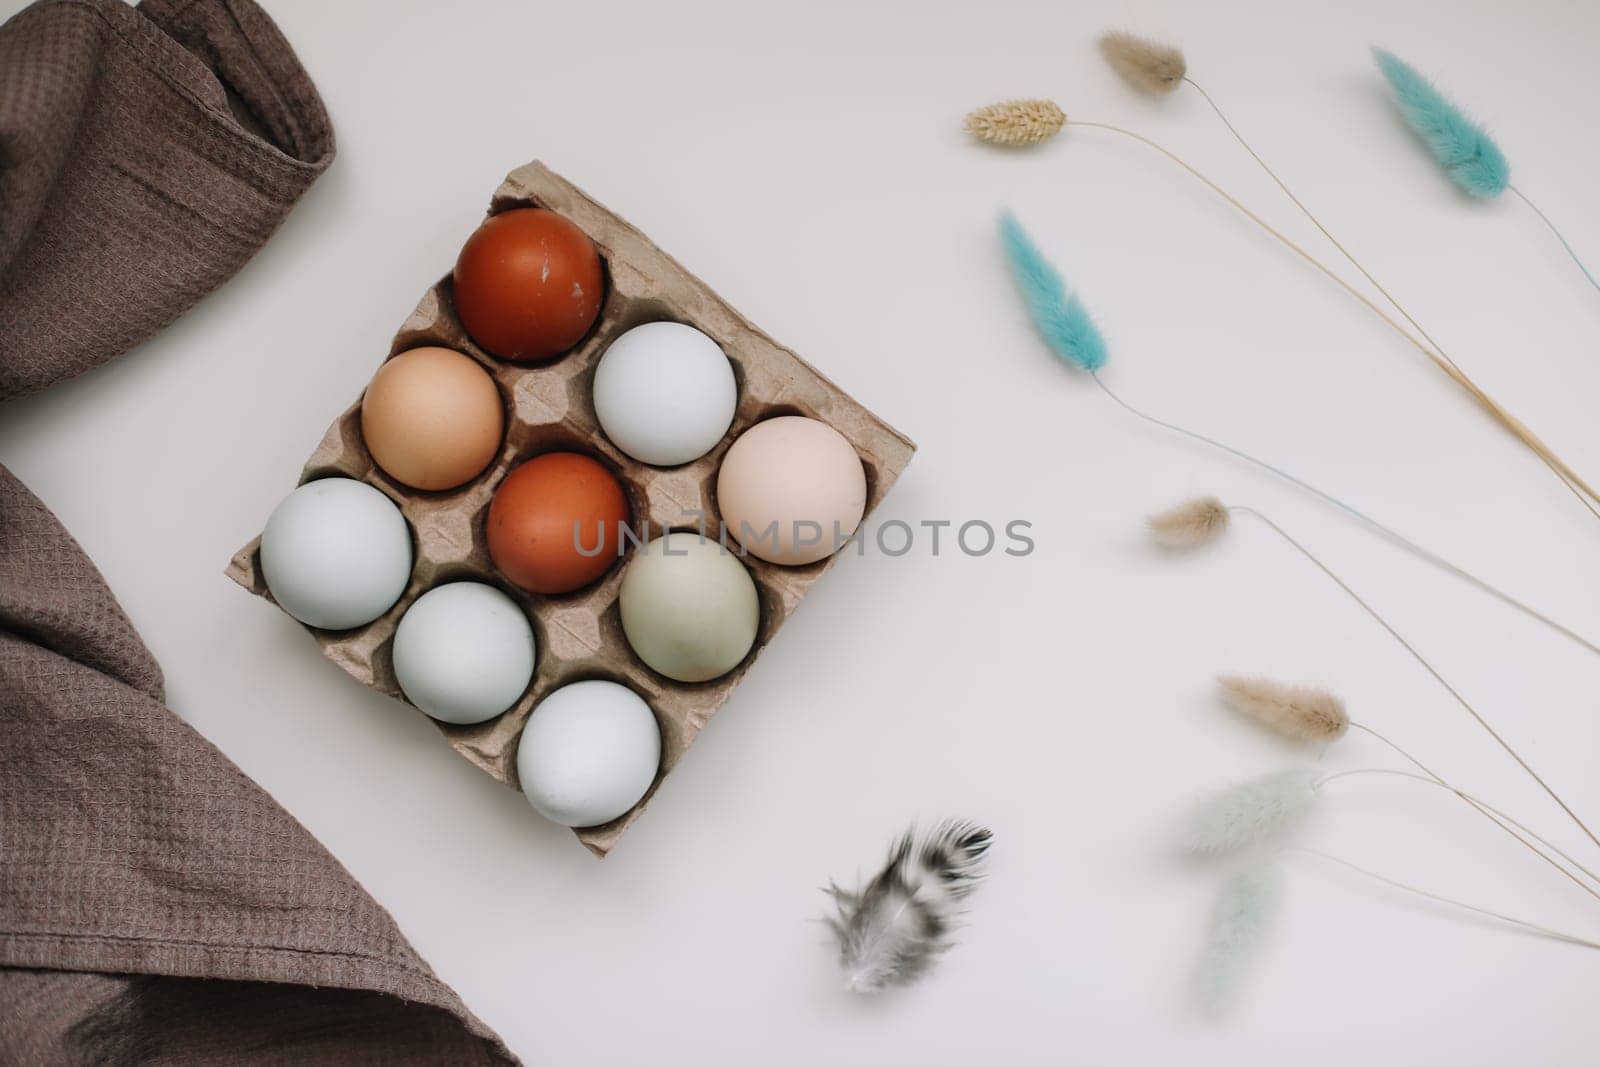 fresh chicken eggs of natural shades and colors in a recycled box on a white background.